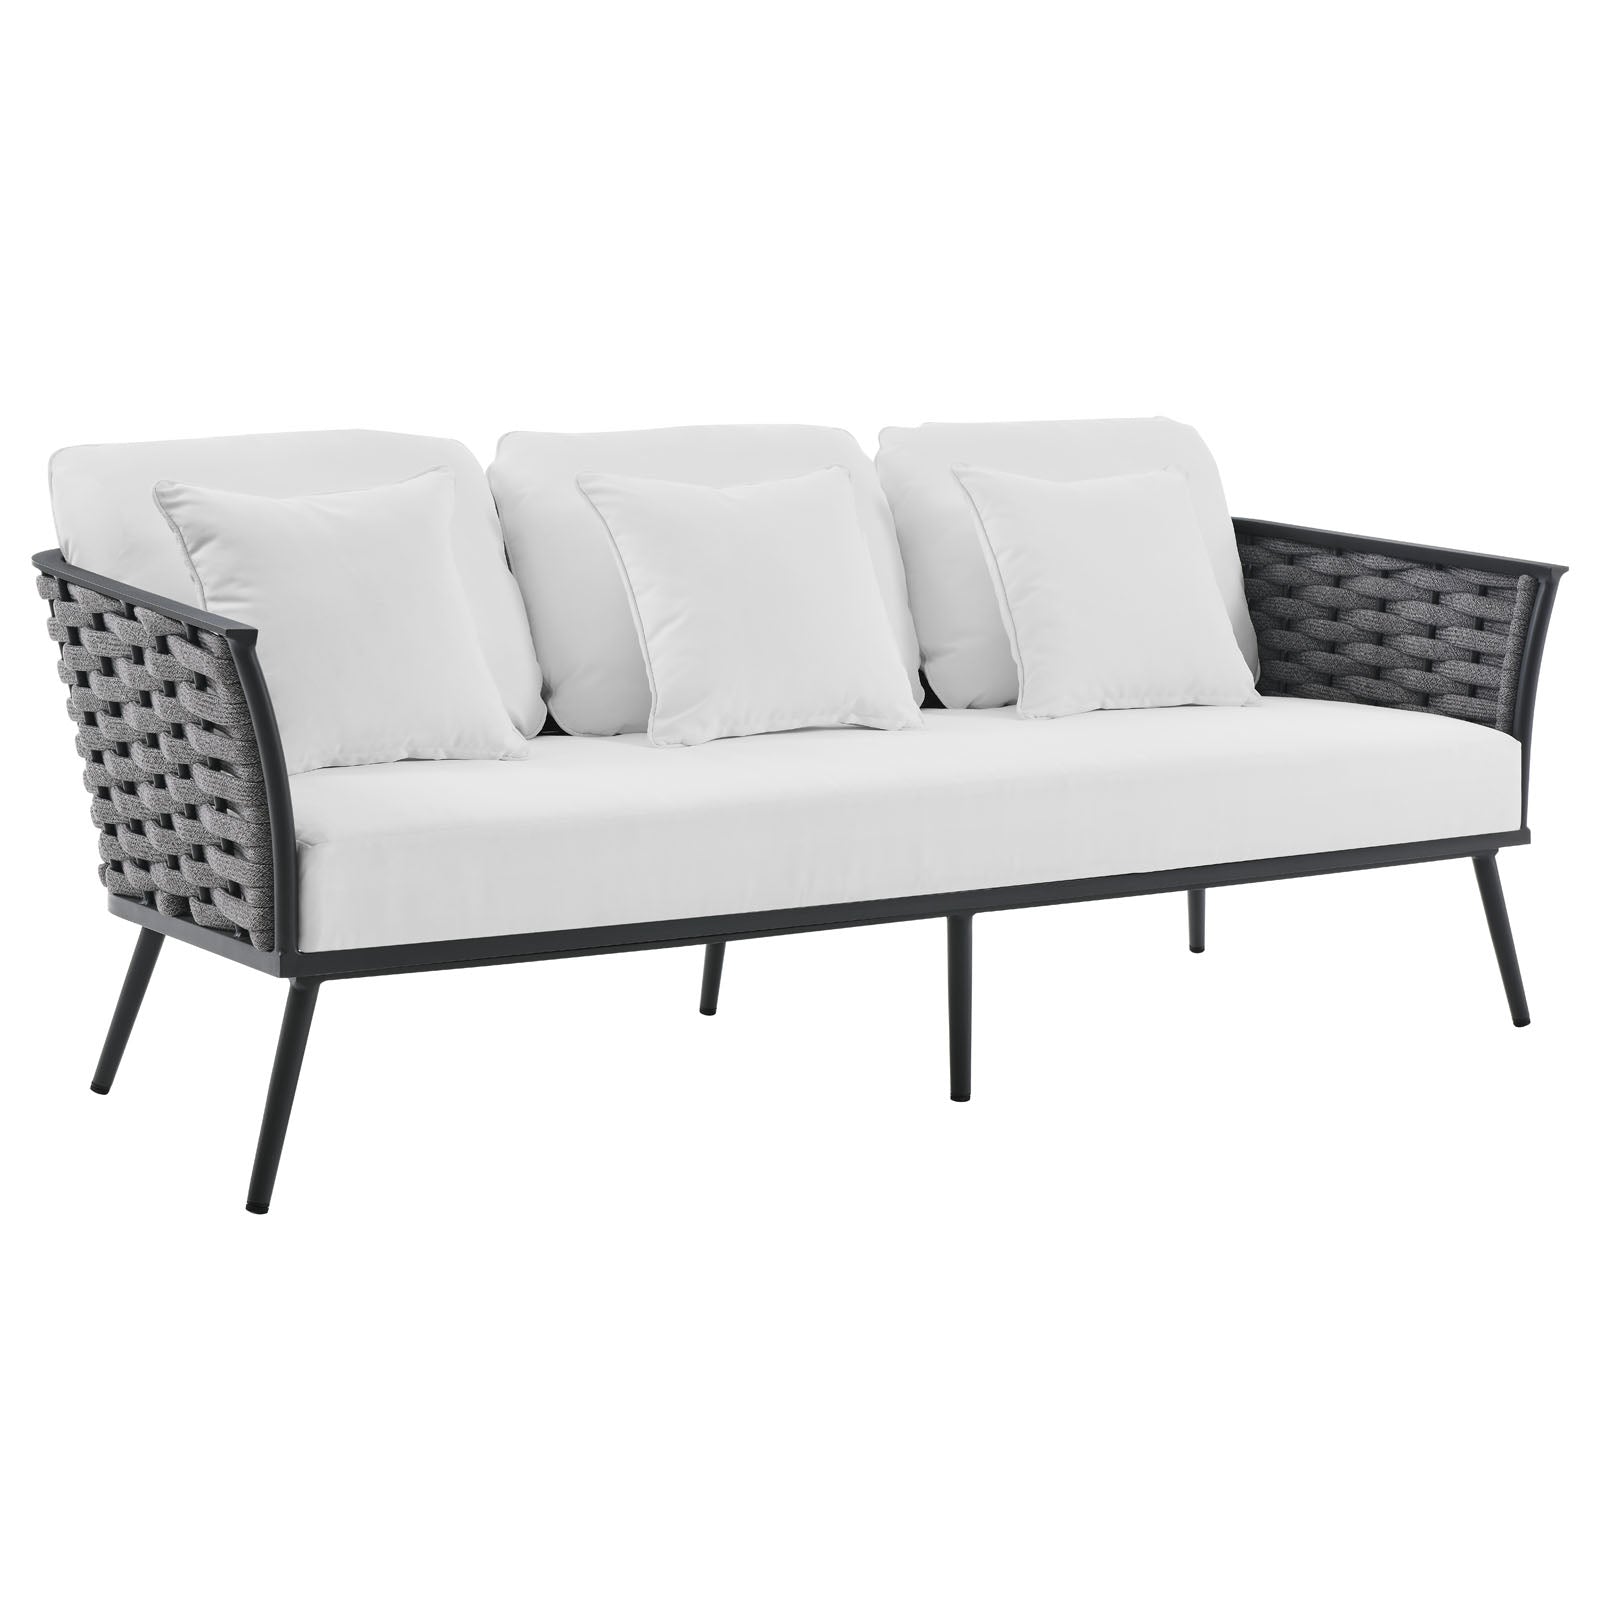 Stance 3 Piece Outdoor Patio Aluminum Sectional Sofa Set-Outdoor Set-Modway-Wall2Wall Furnishings